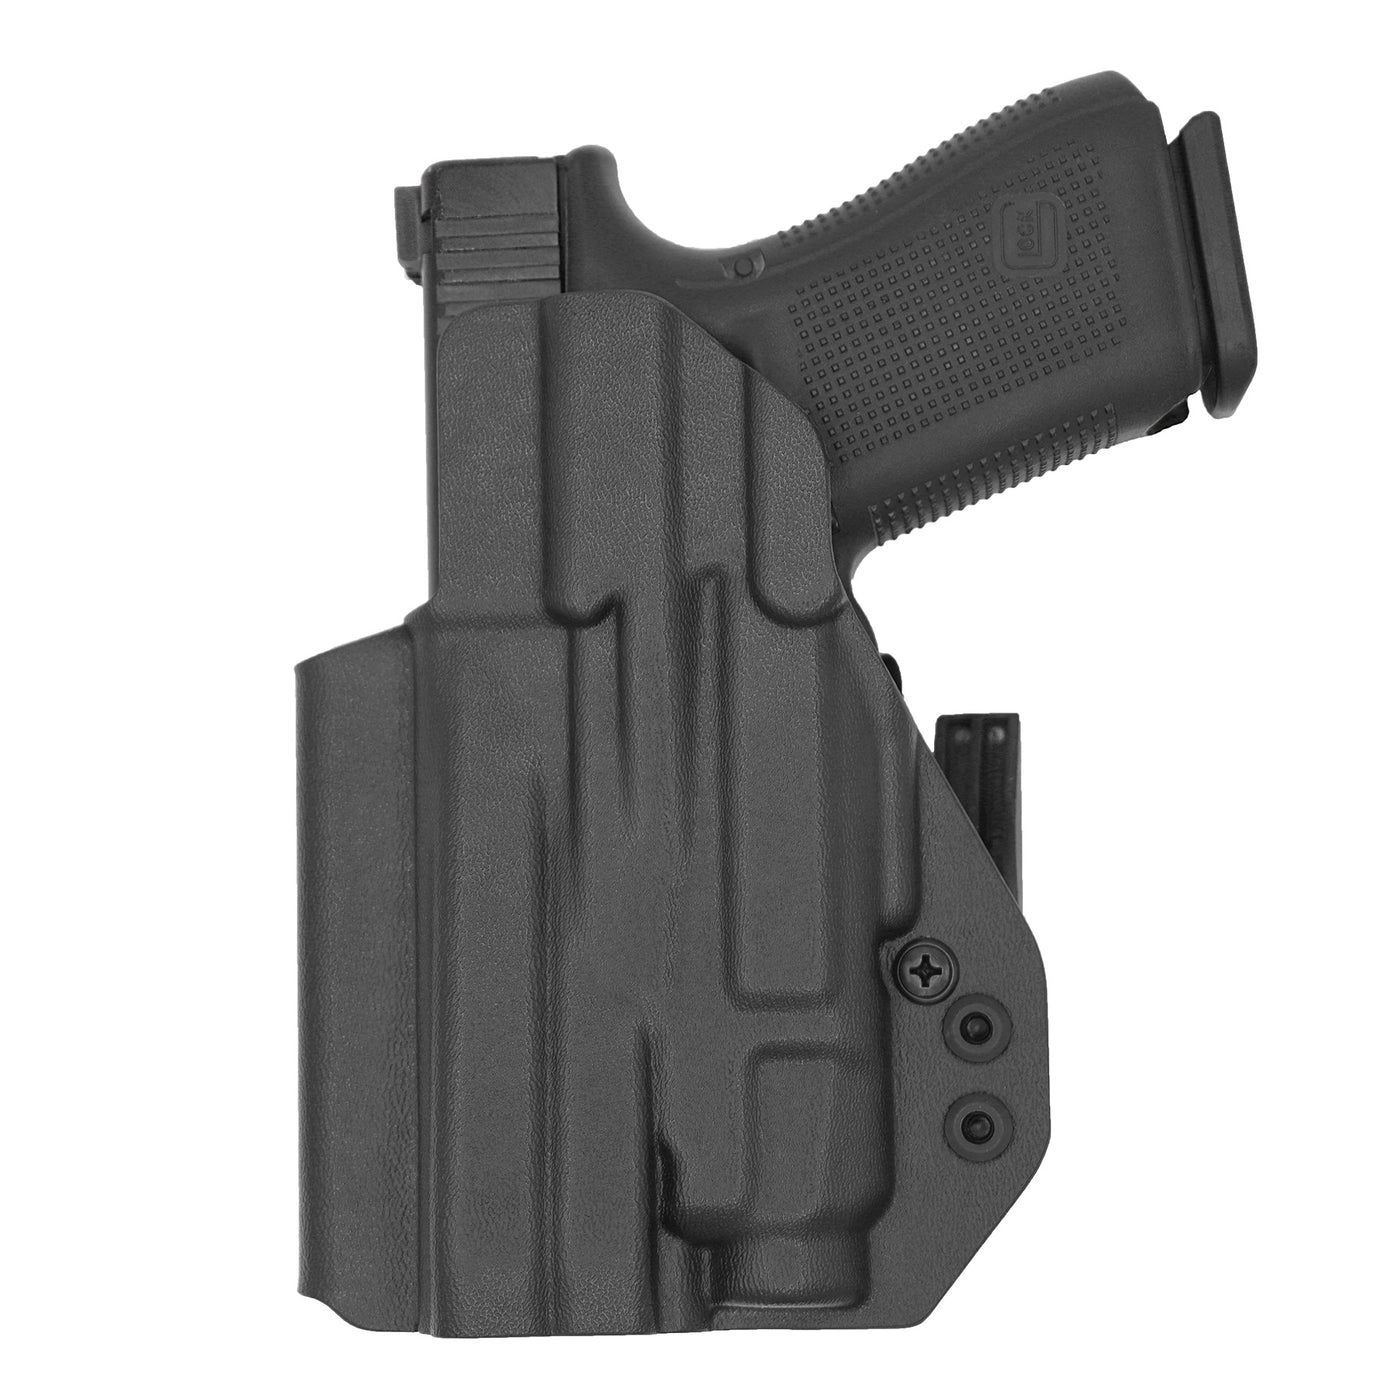 C&G Holsters Quickship IWB ALPHA UPGRADE Tactical Glock 20/21 Streamlight TLR7/a in holstered position back view